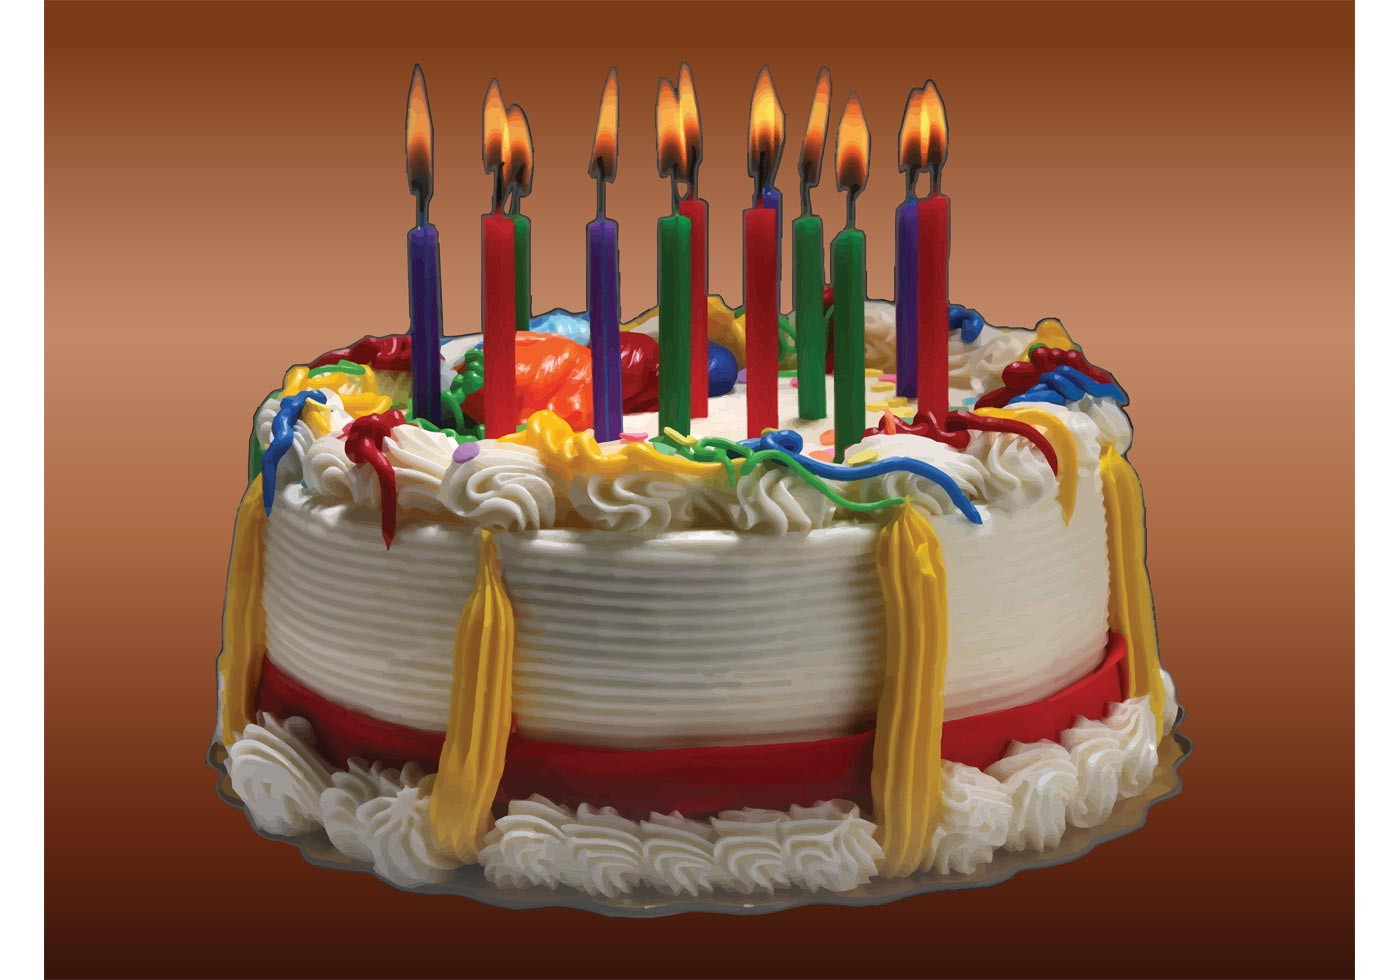 Birthday Cake Picture Free Download
 Birthday Cake Image Download Free Vector Art Stock